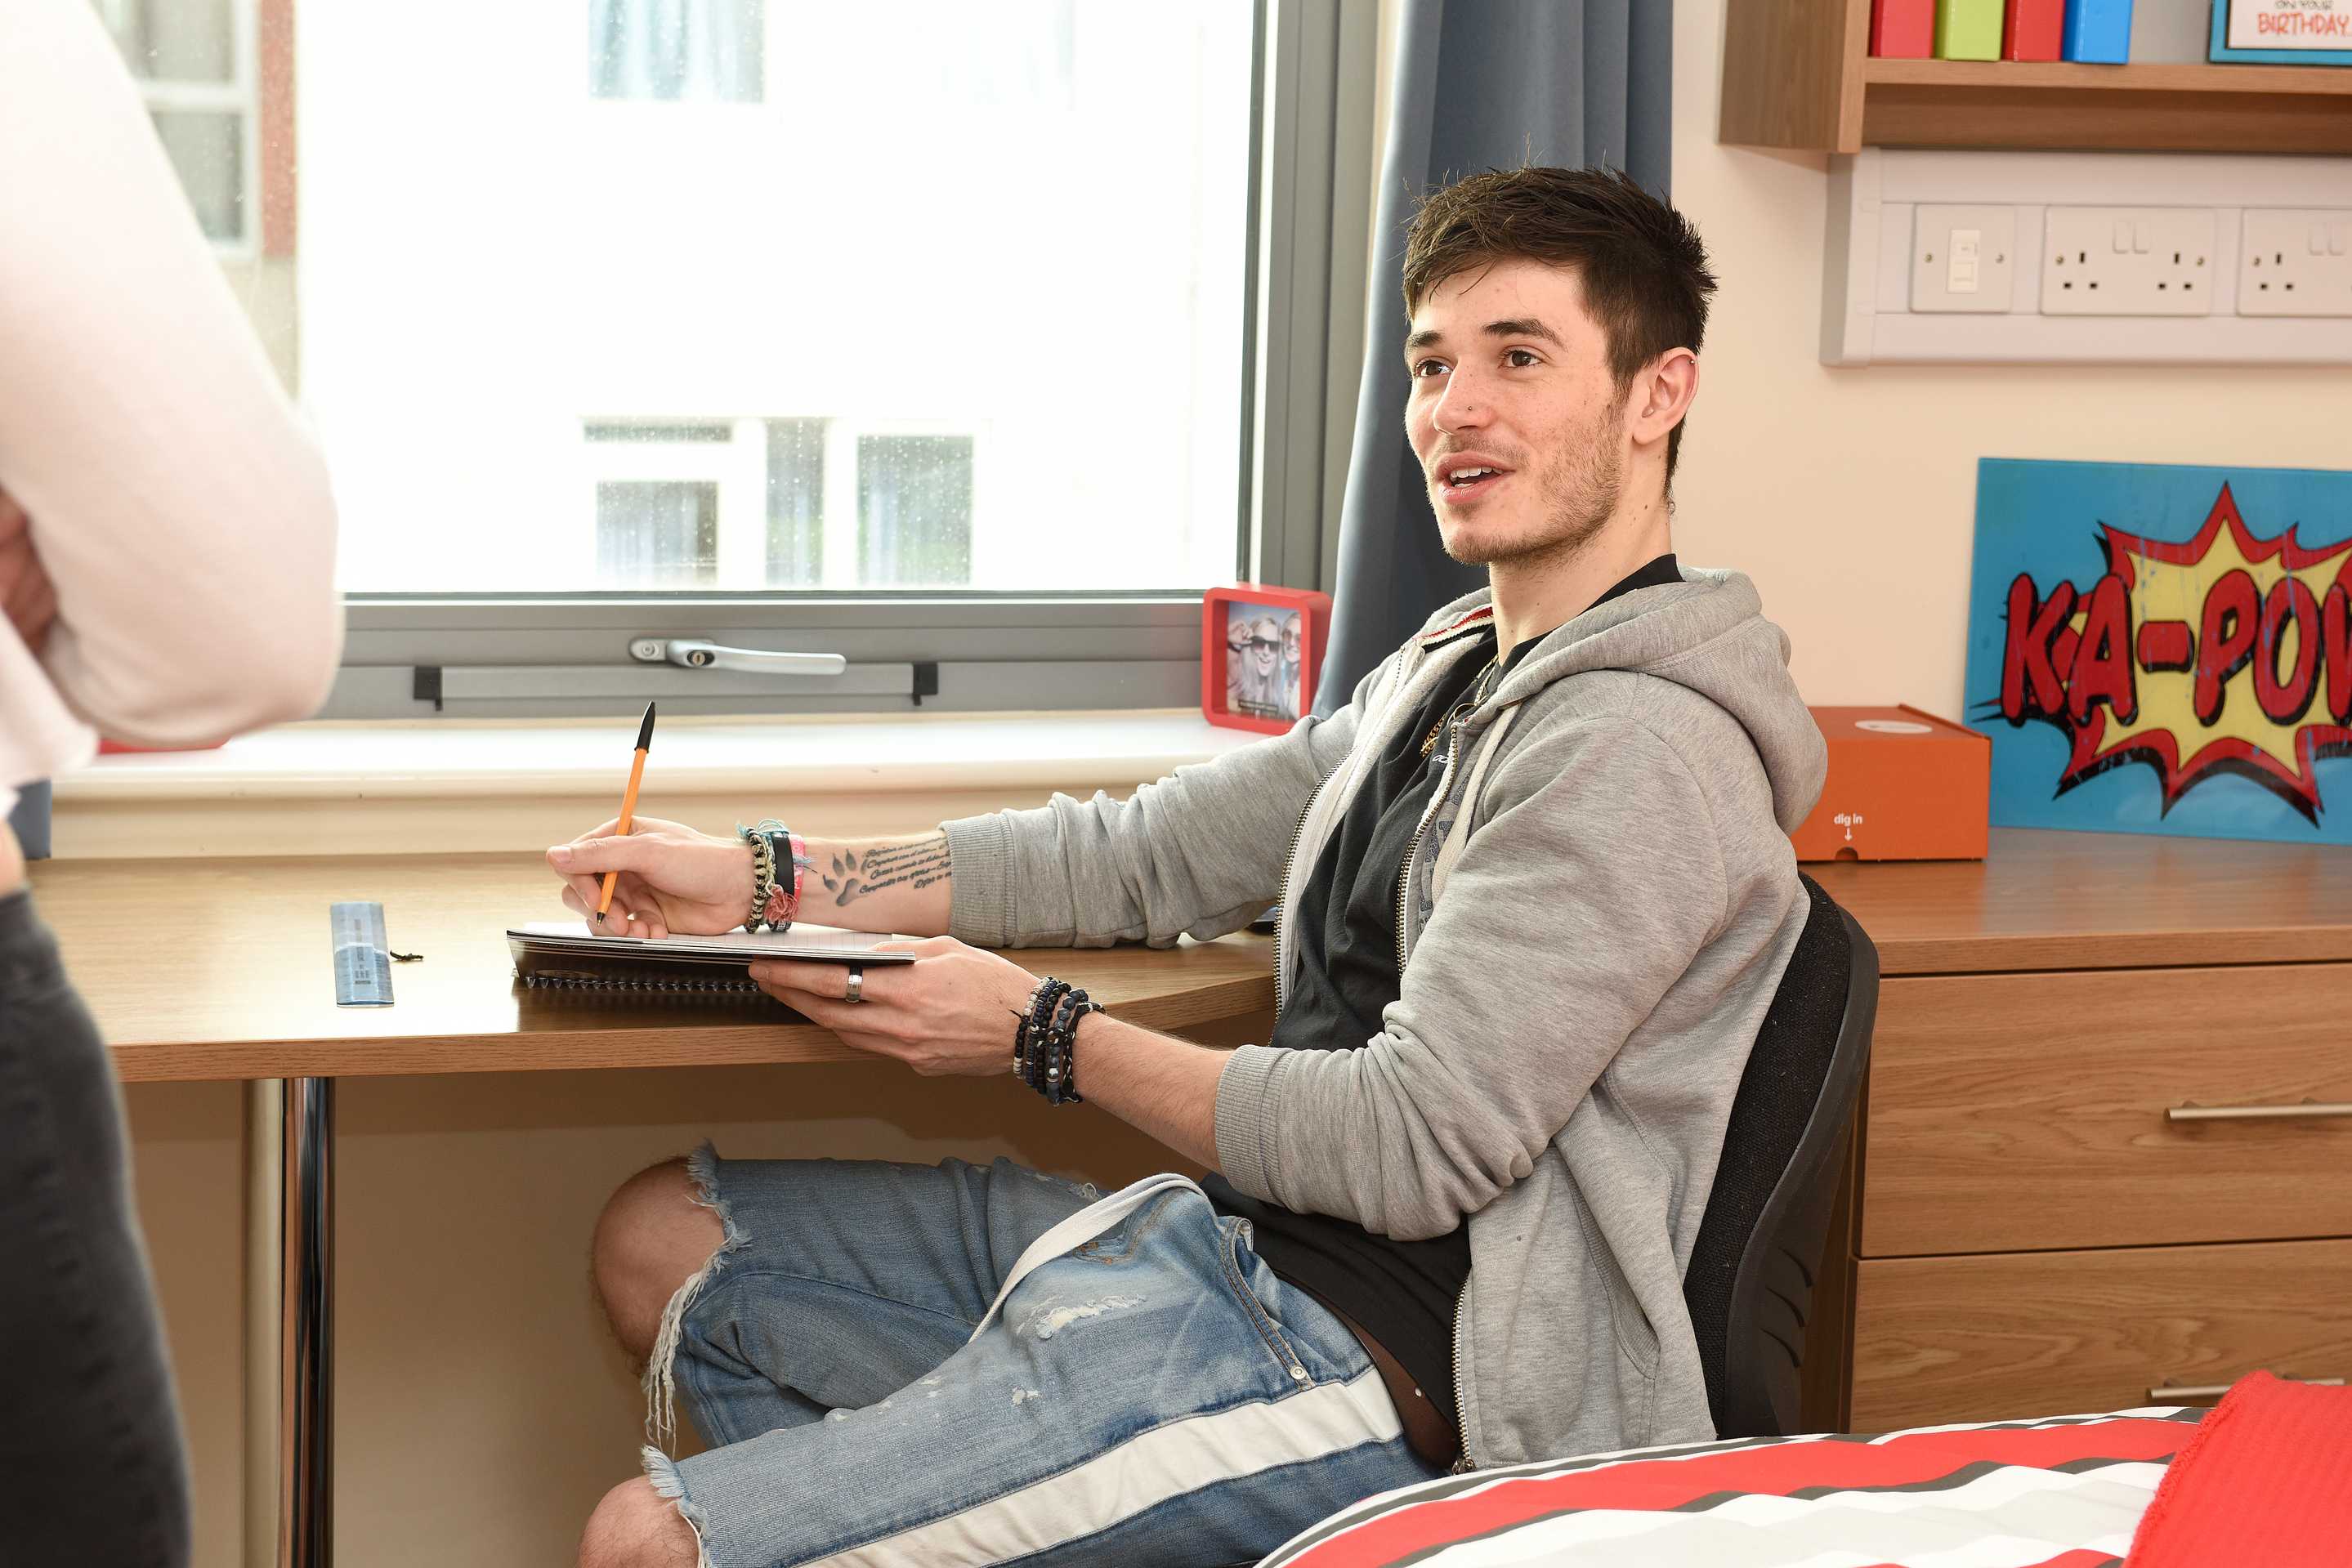 Student sitting at a desk in a bedroom